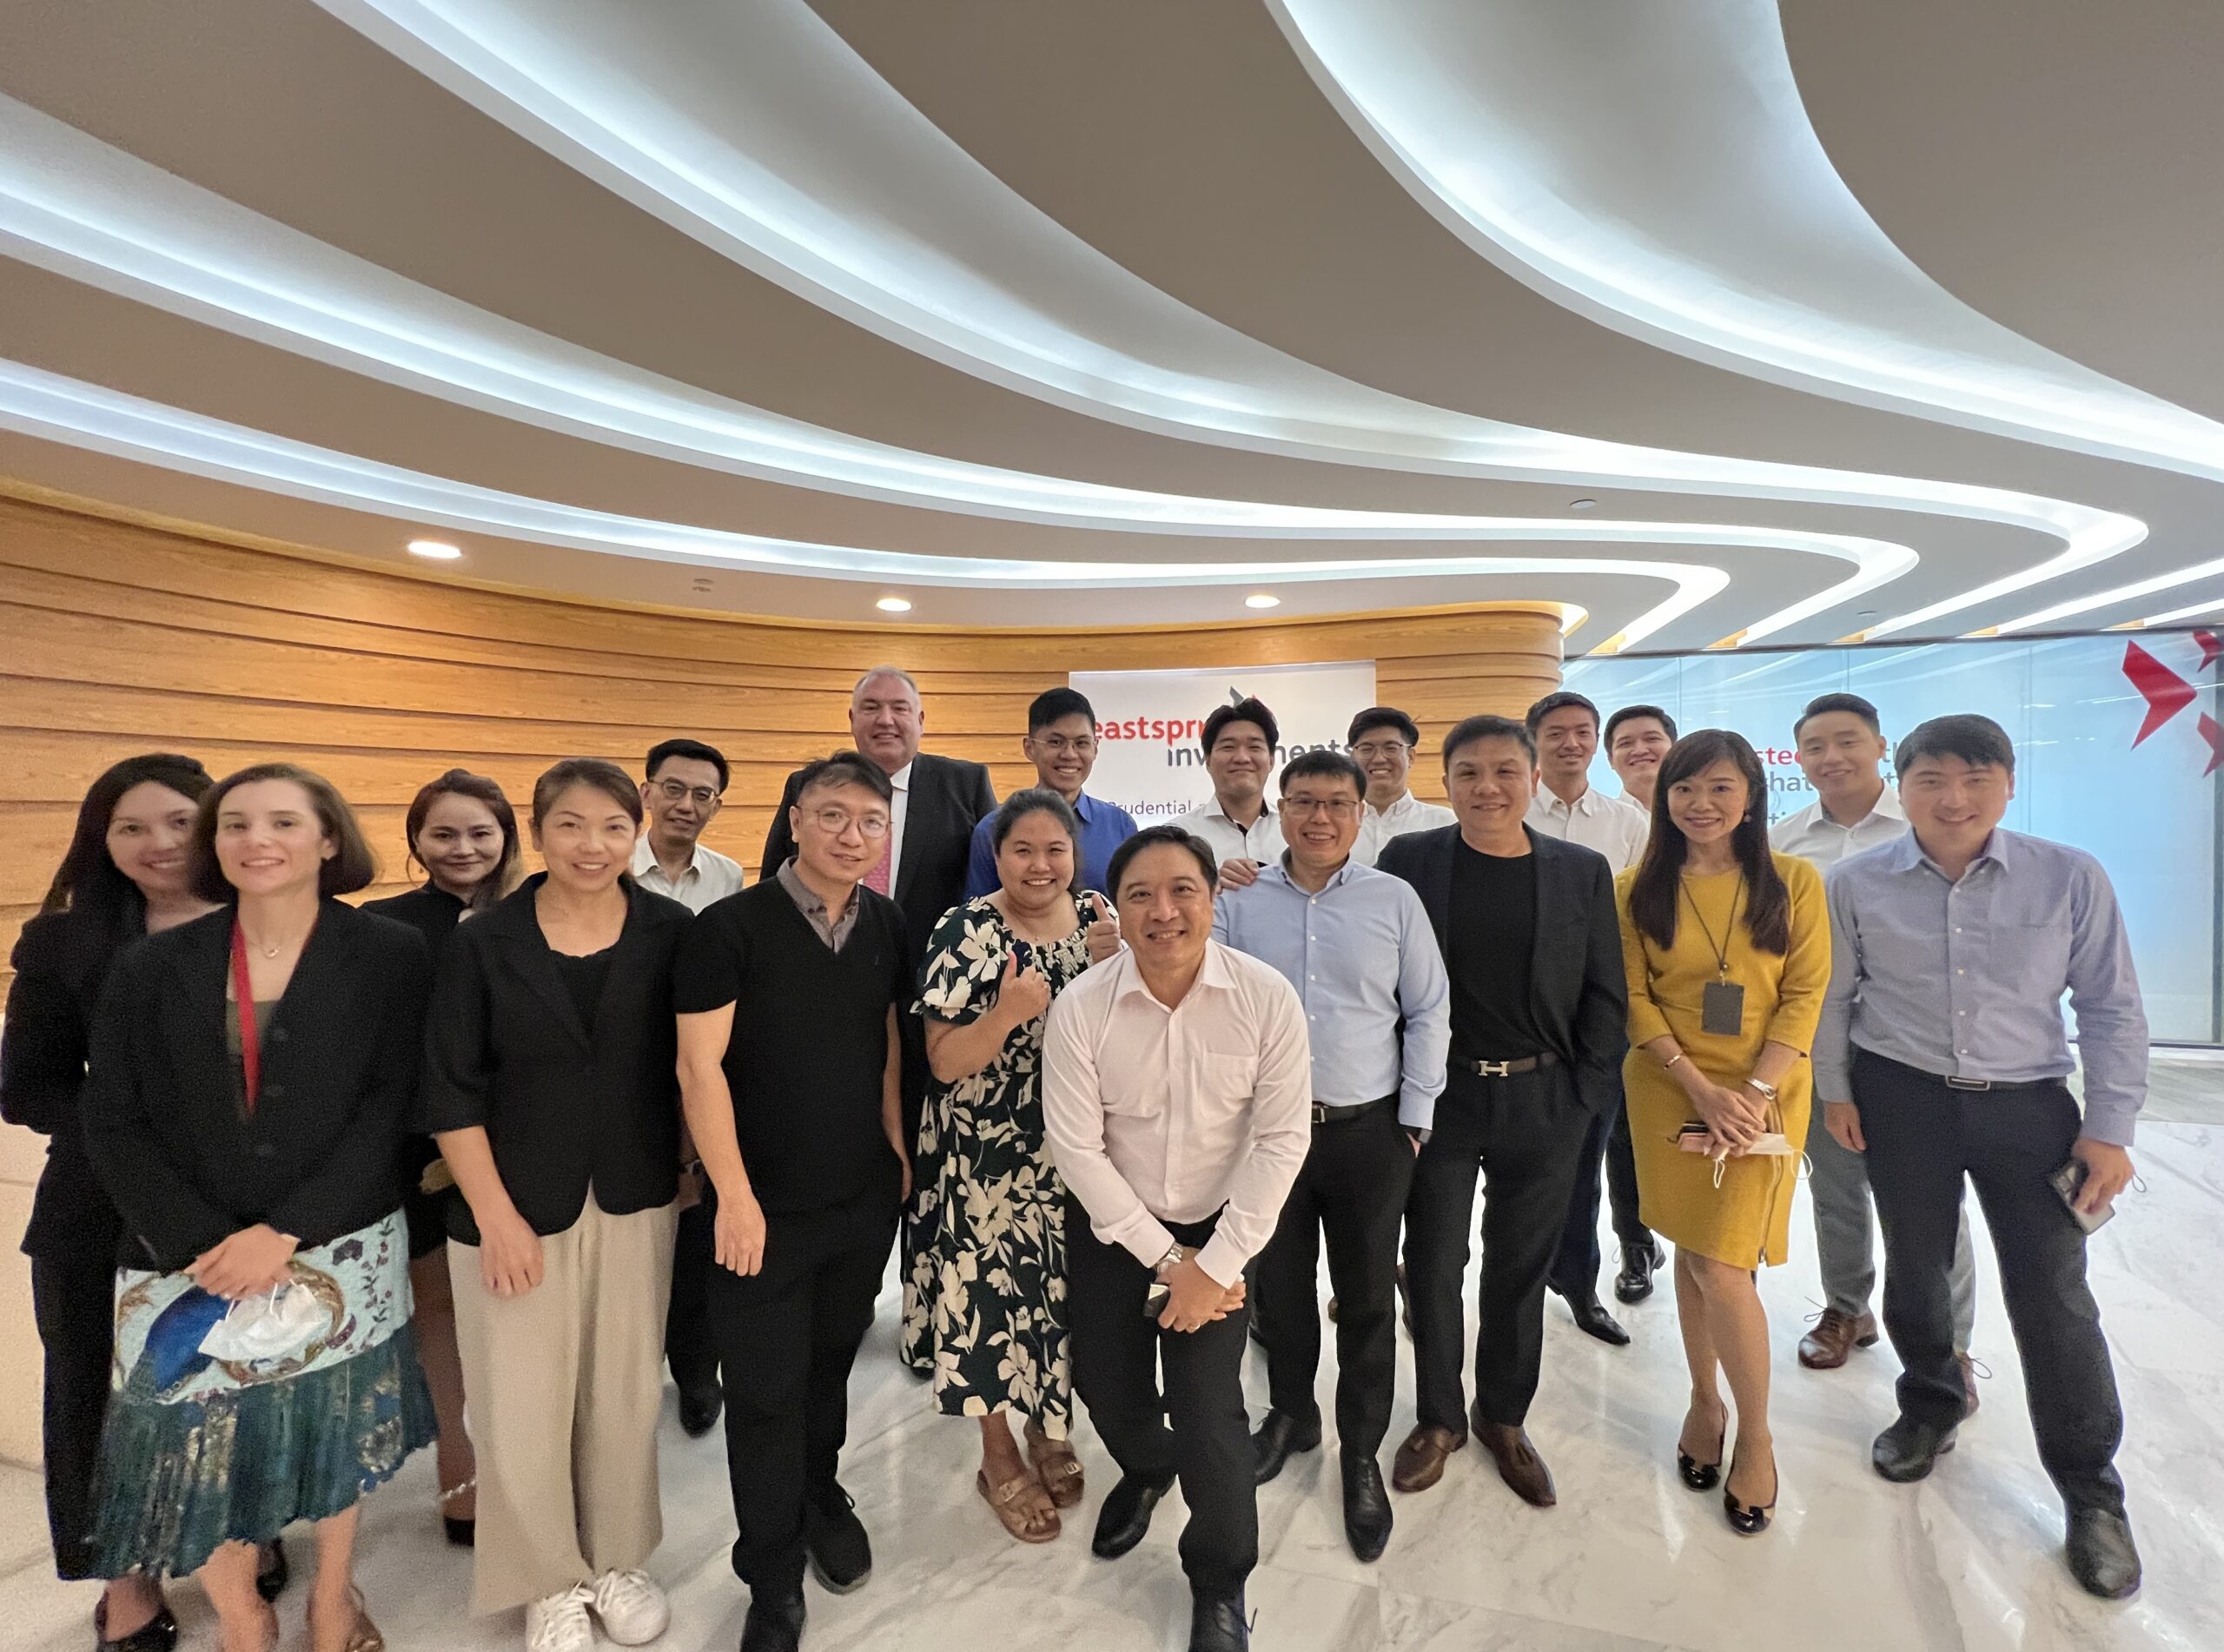 Thank you Eastspring Investment (Singapore) for hosting us today!